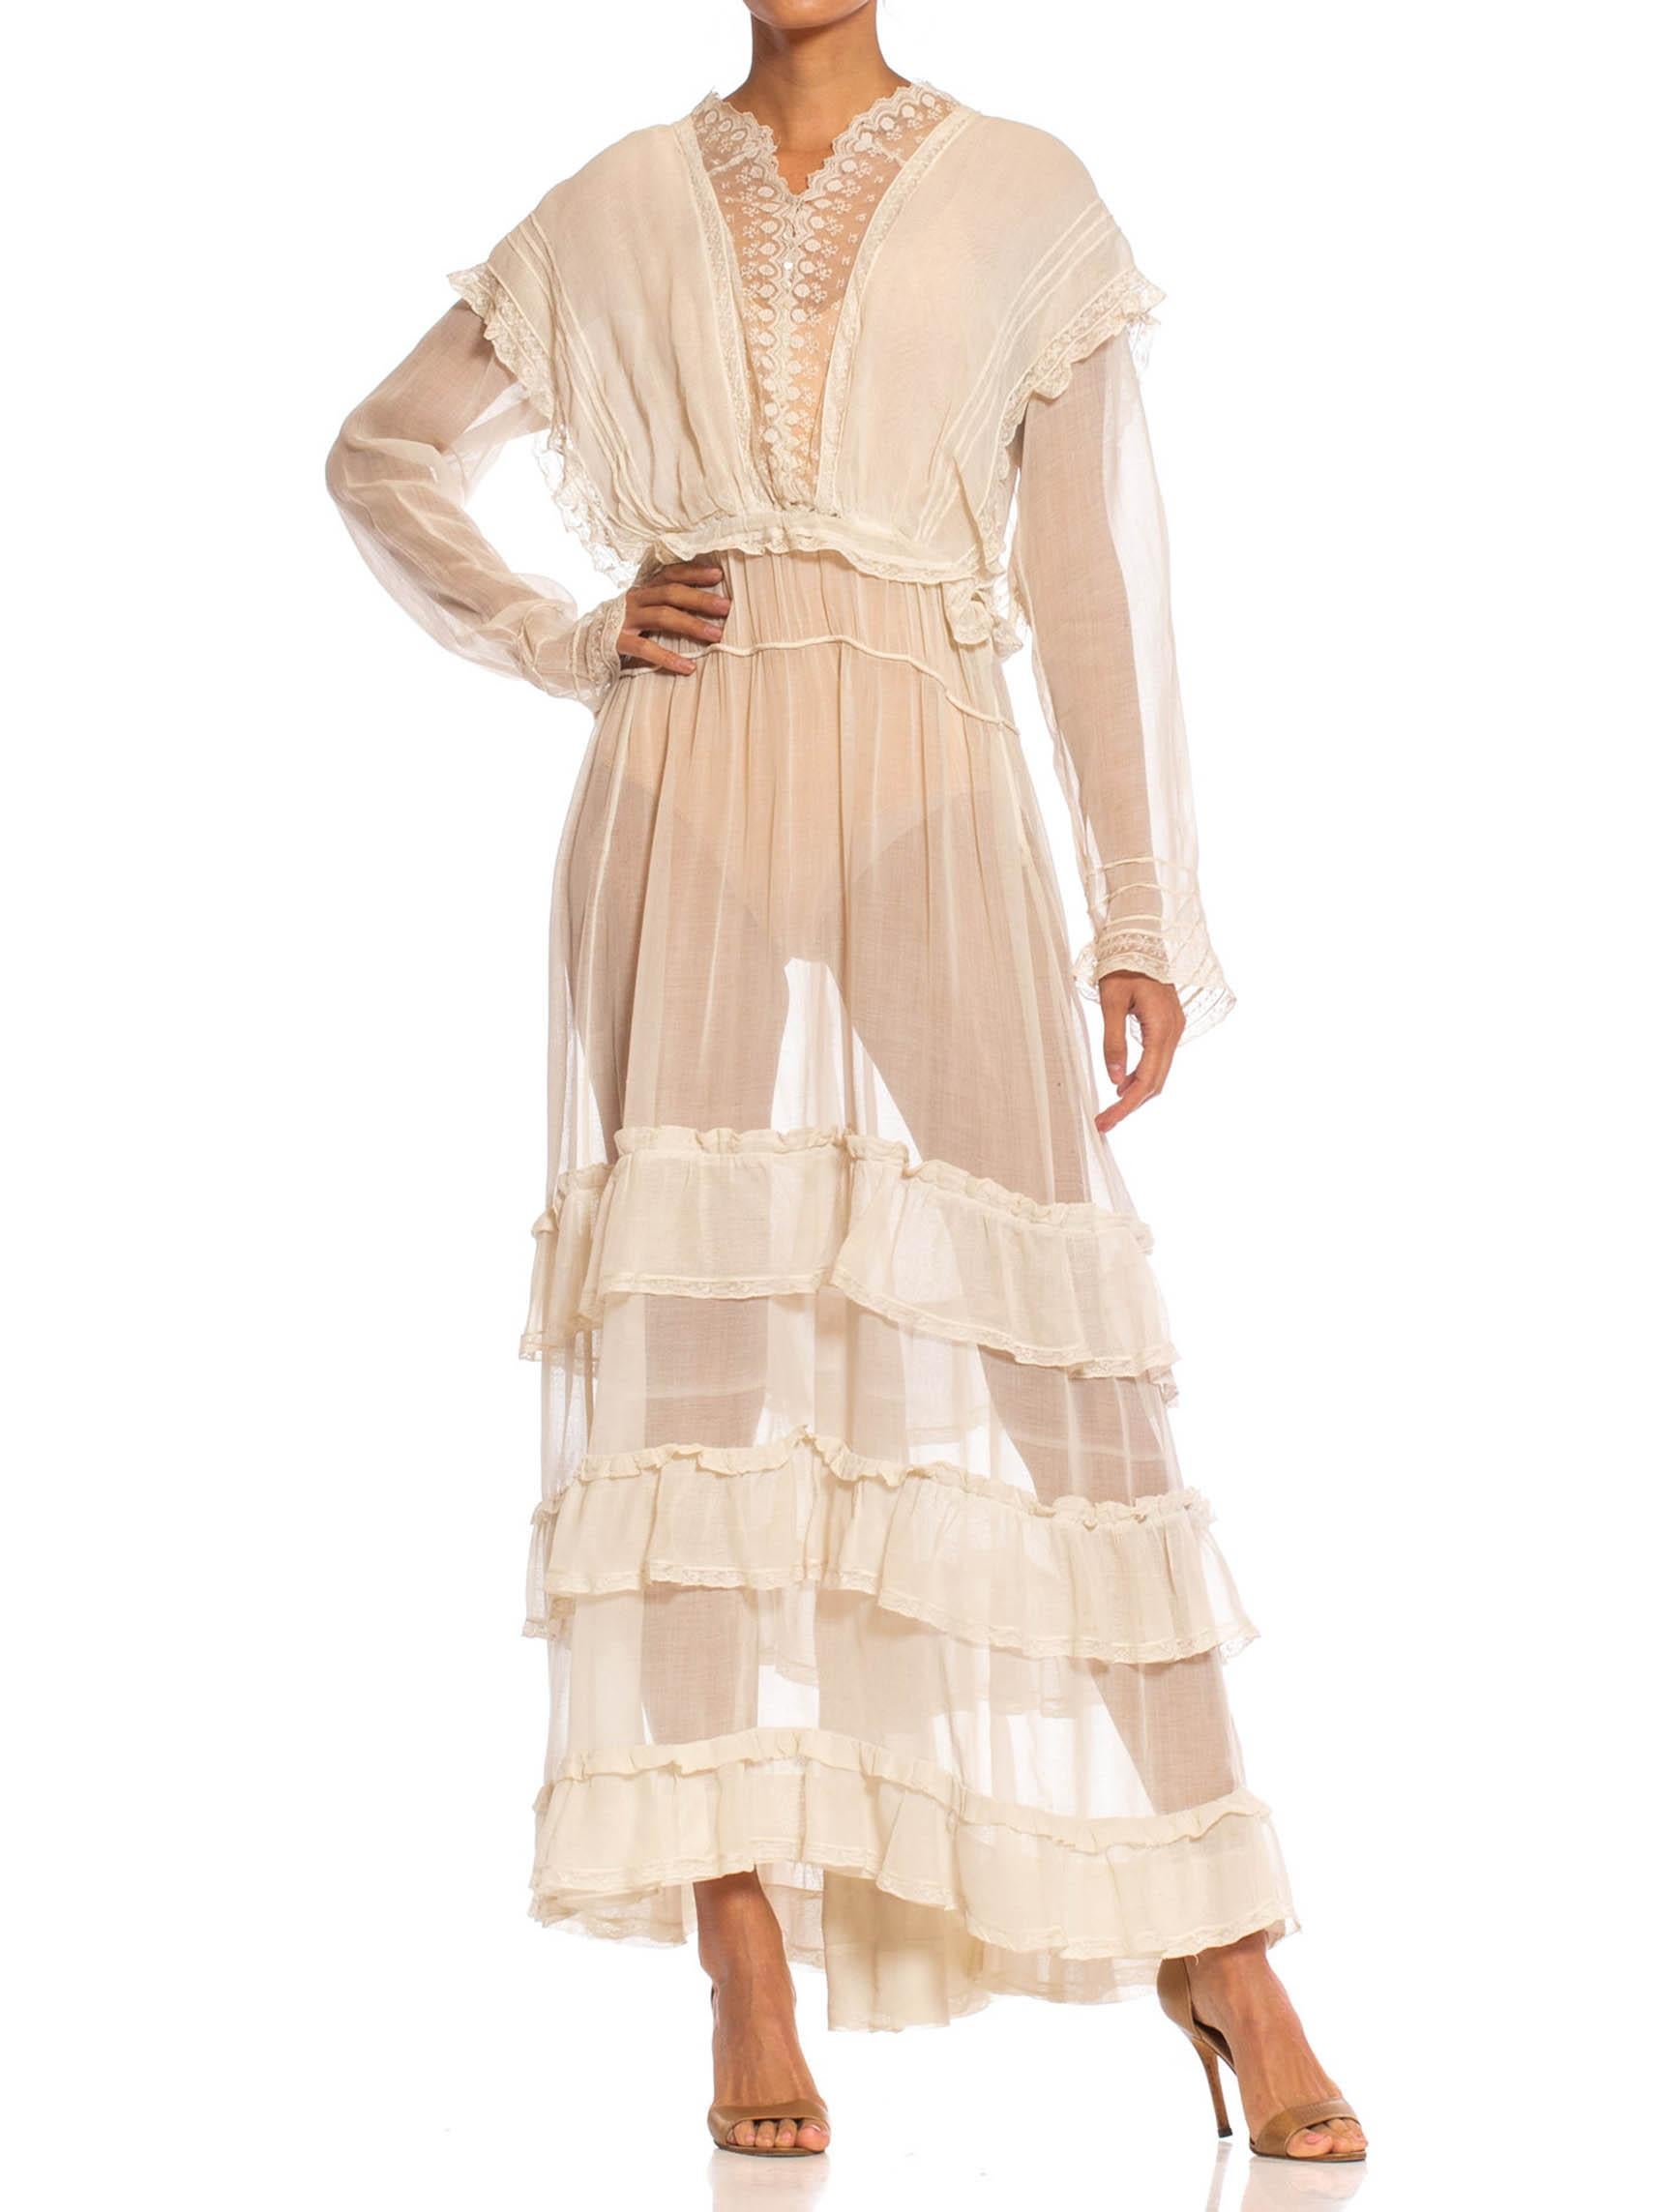 Edwardian Off White Organic Cotton Voile & Lace Long Sleeved Ruffled Tea Dress 3